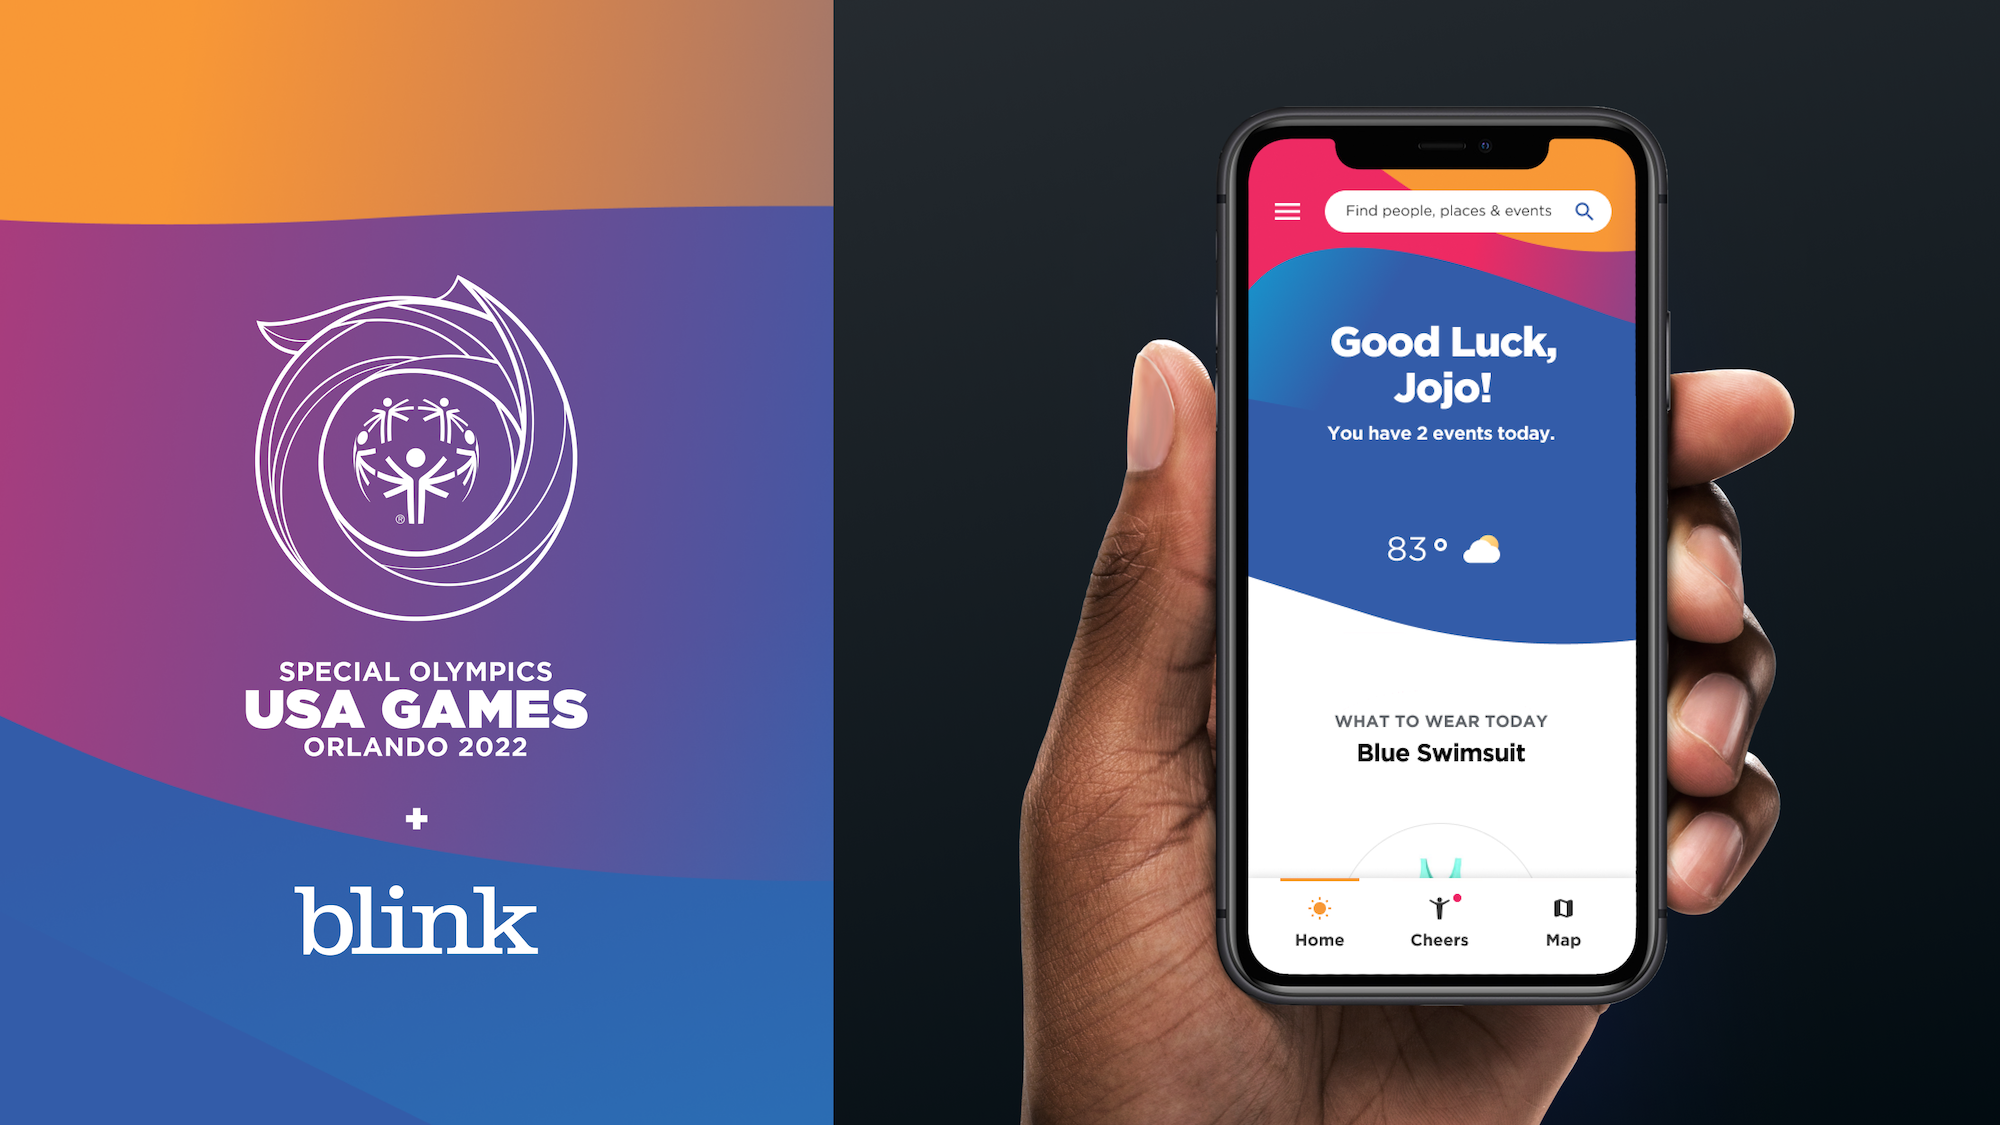 Blink + Special Olympics USA Games 2022